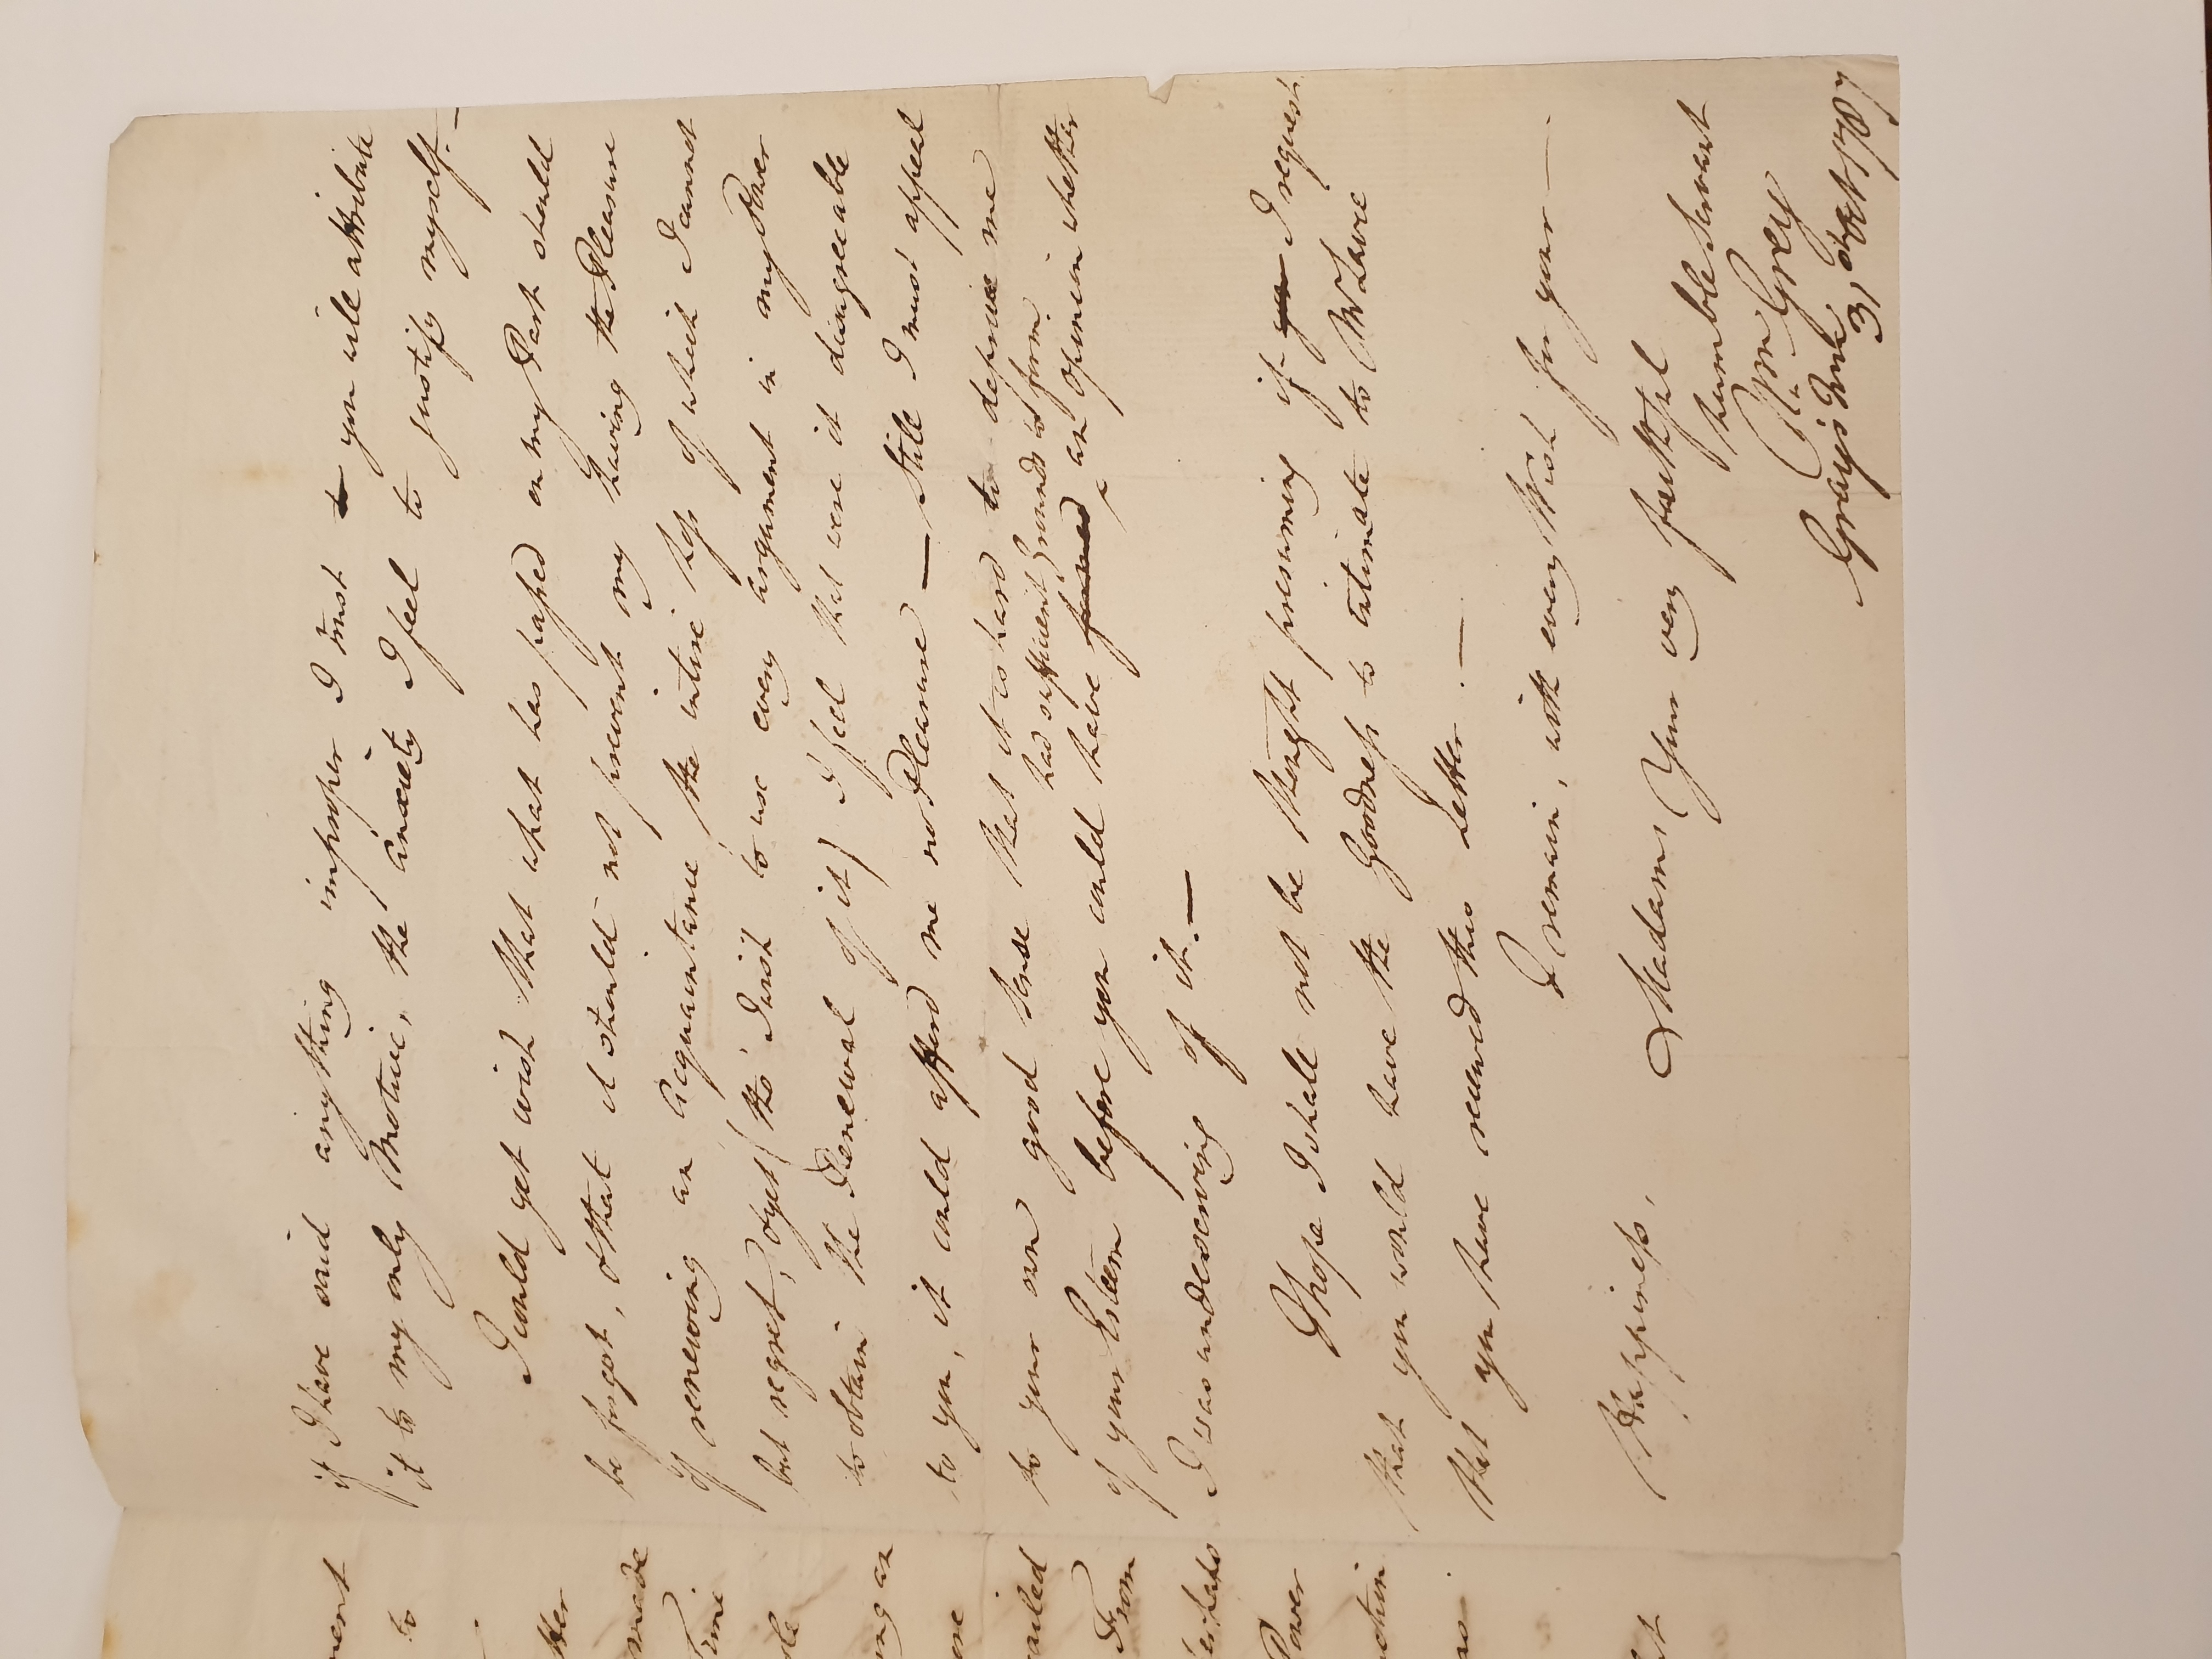 Image #3 of letter: William Grey to Ann Heatley, 31 October 1787